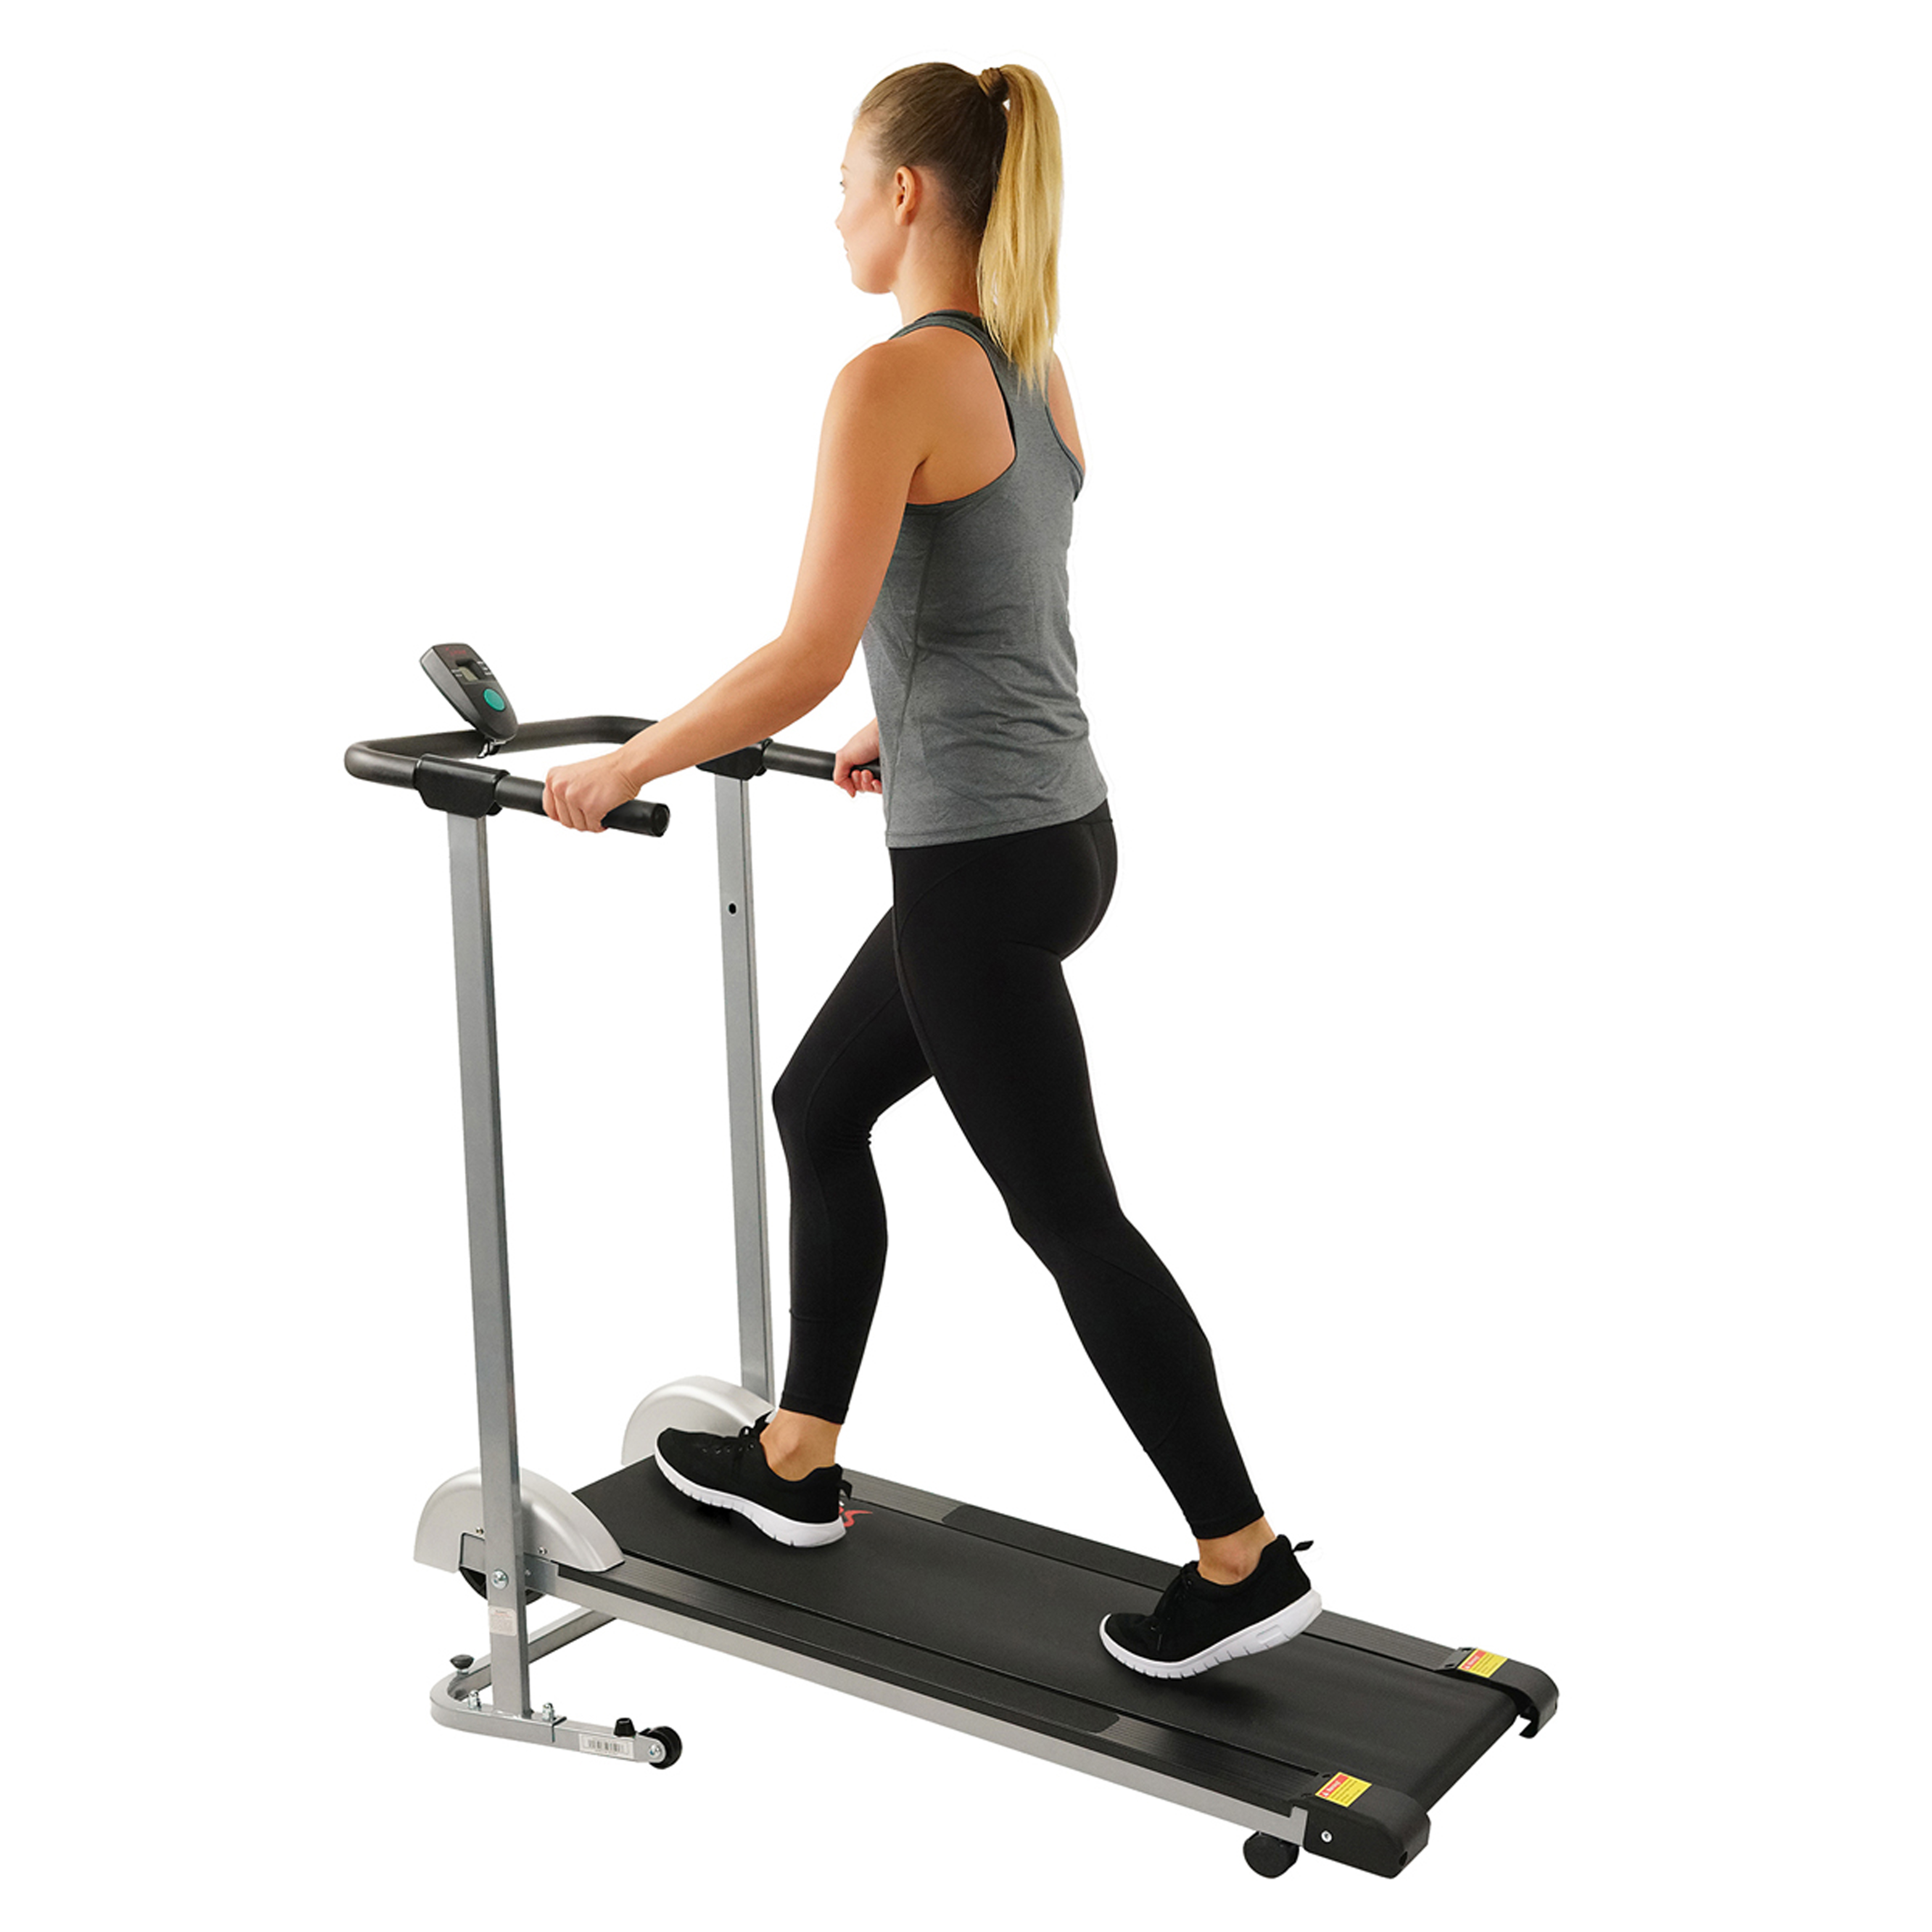 Sunny Health & Fitness Manual Treadmill - Compact Foldable Exercise Machine for Running and Cardio Training, SF-T1407M - image 1 of 7